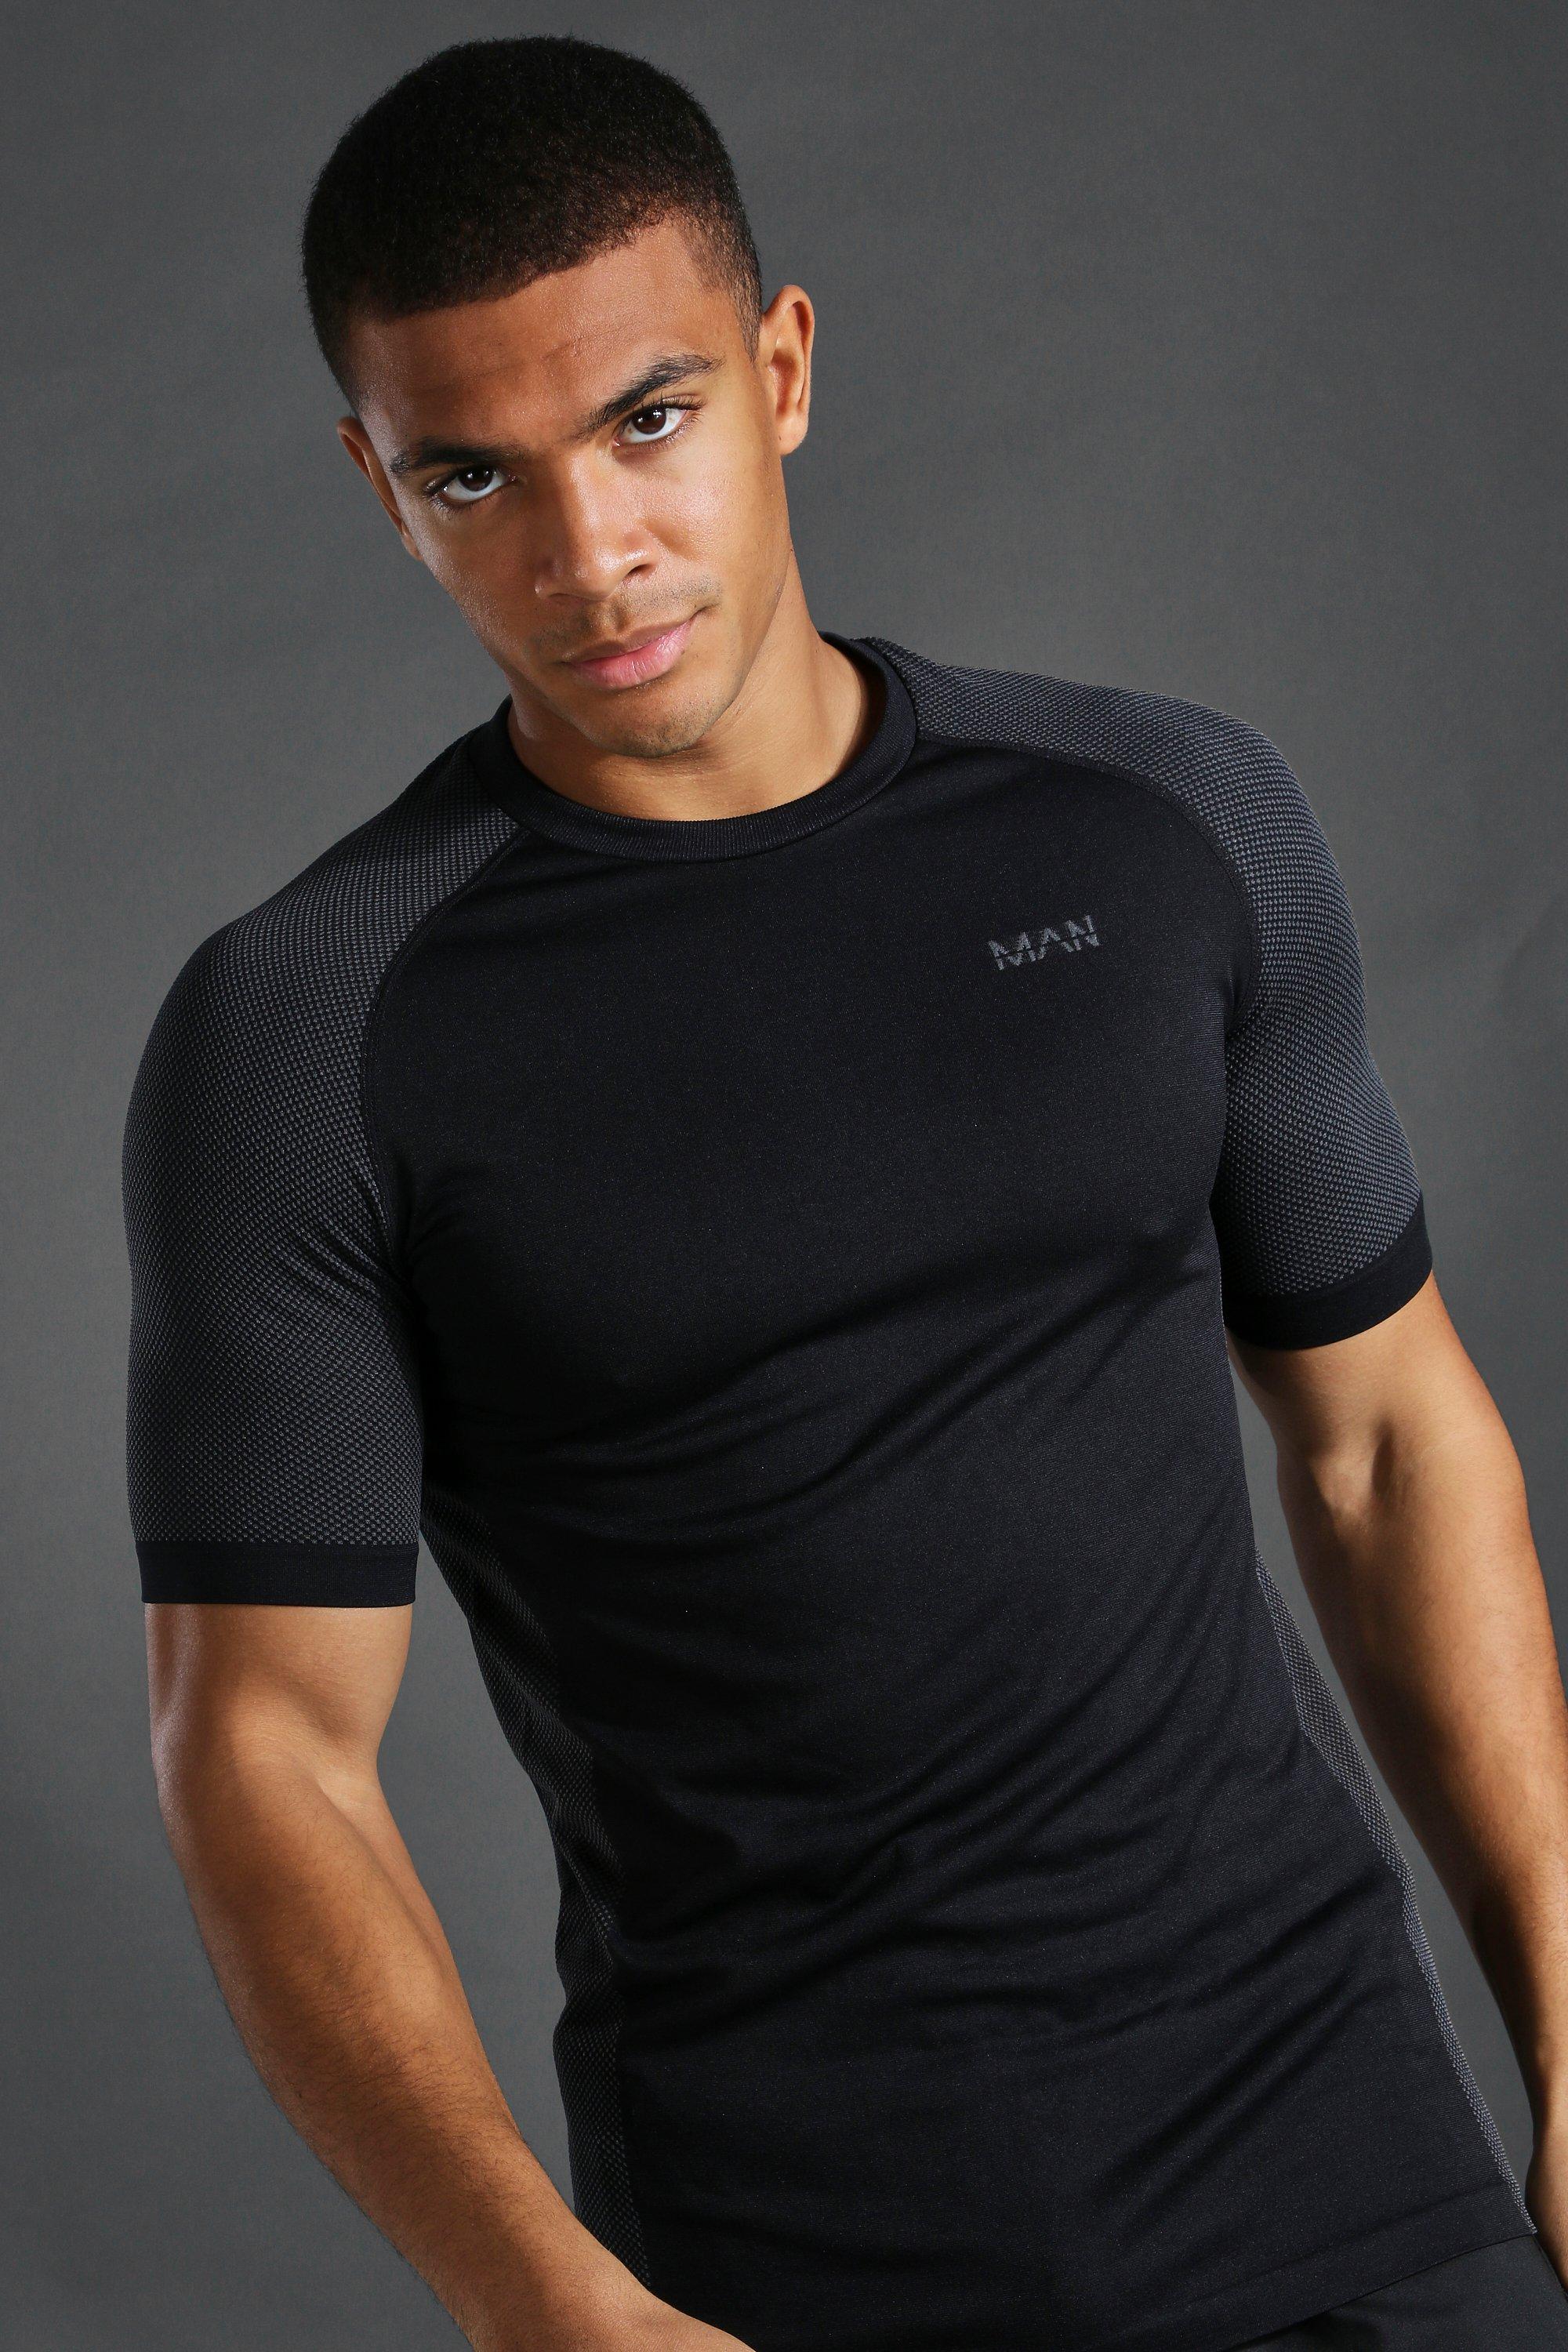 Men's Workout Shirts & Tops - Fitted Fit in Black